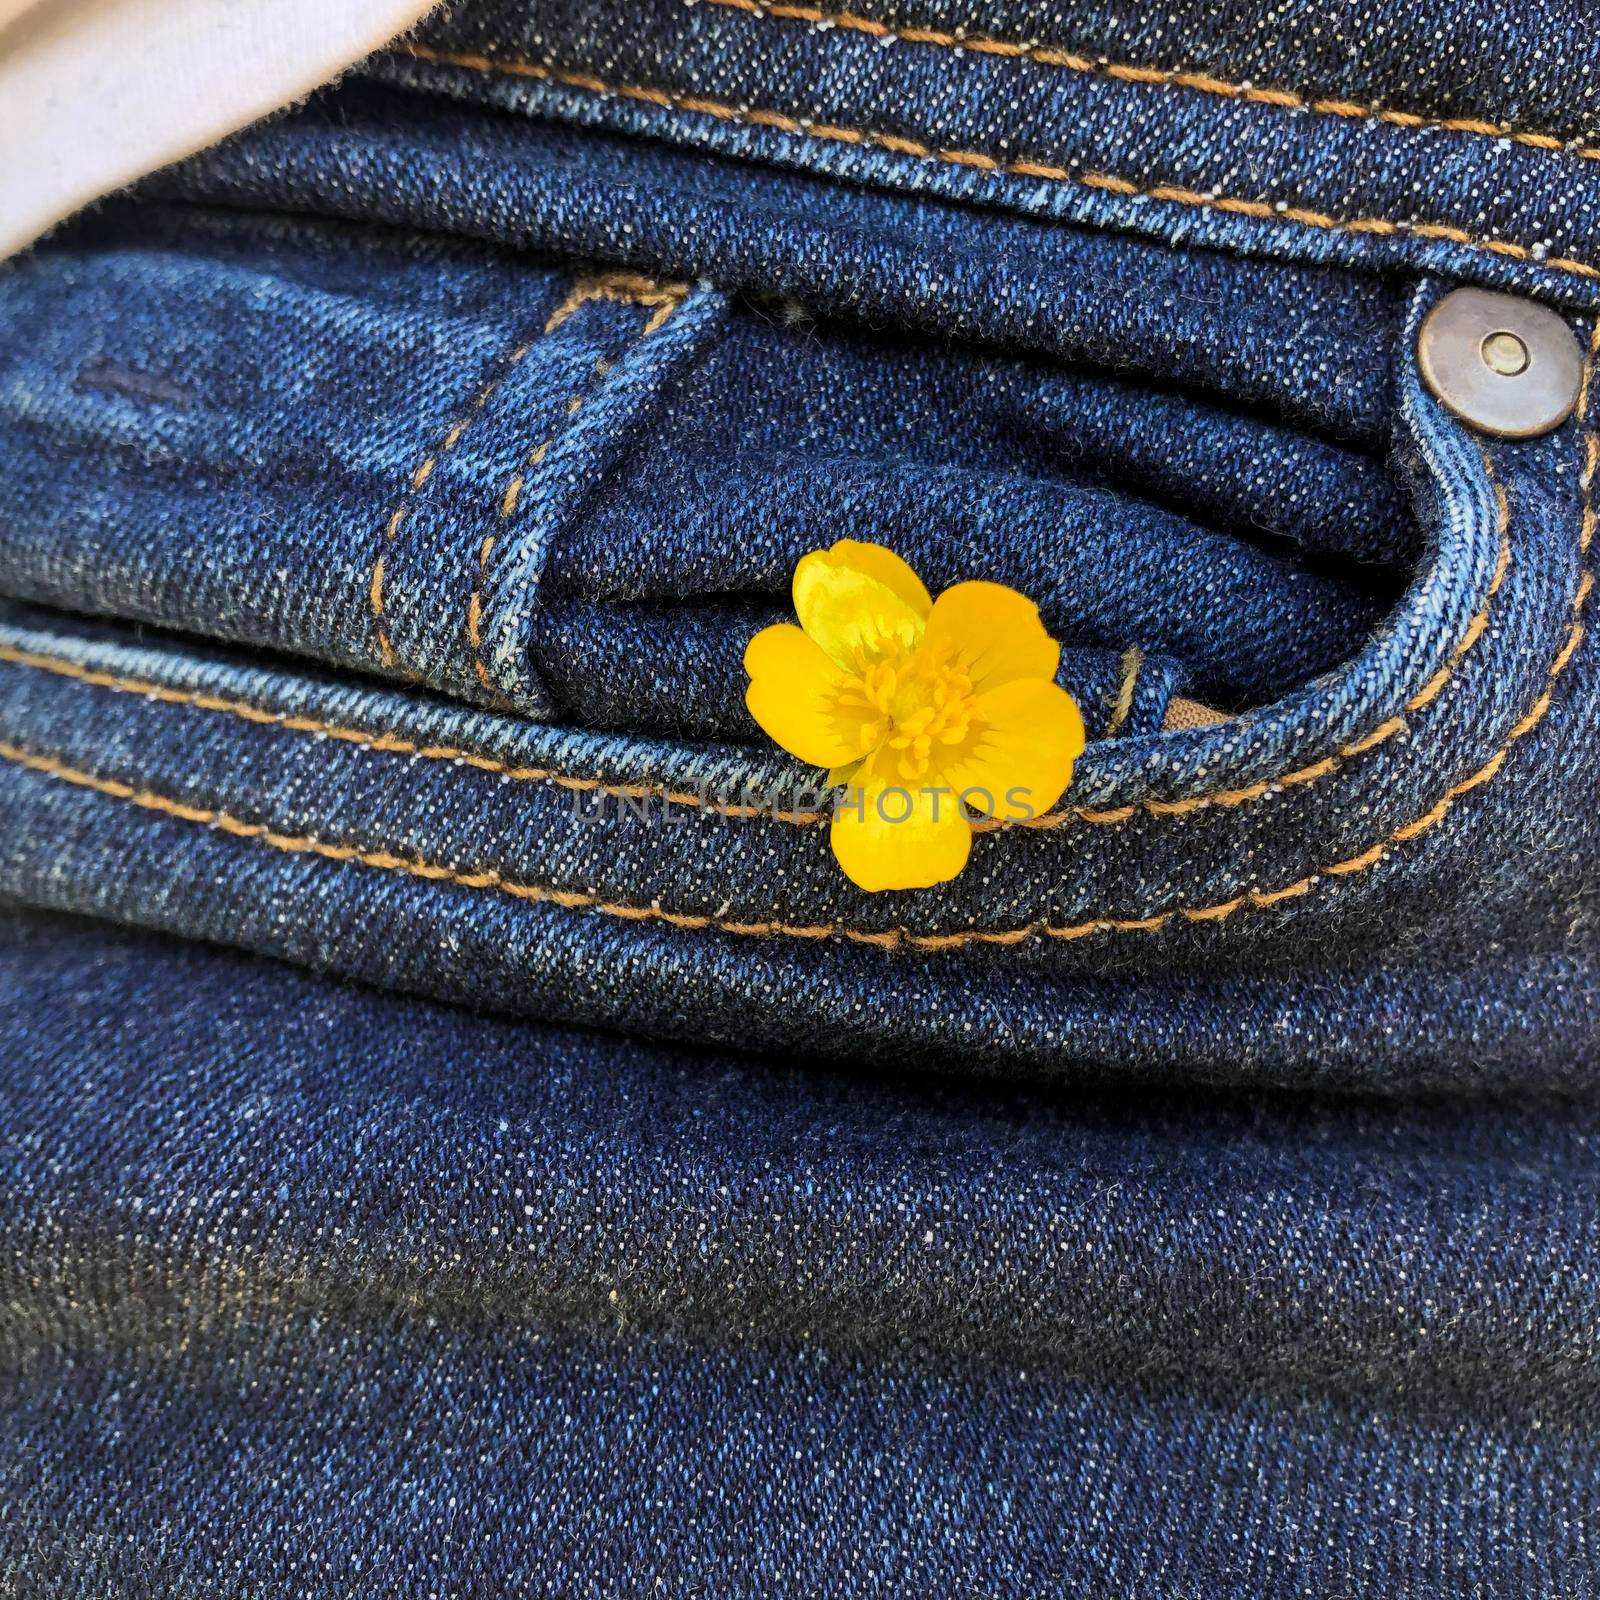 Jeans pocket close-up, in the pocket there is a yellow buttercup flower.